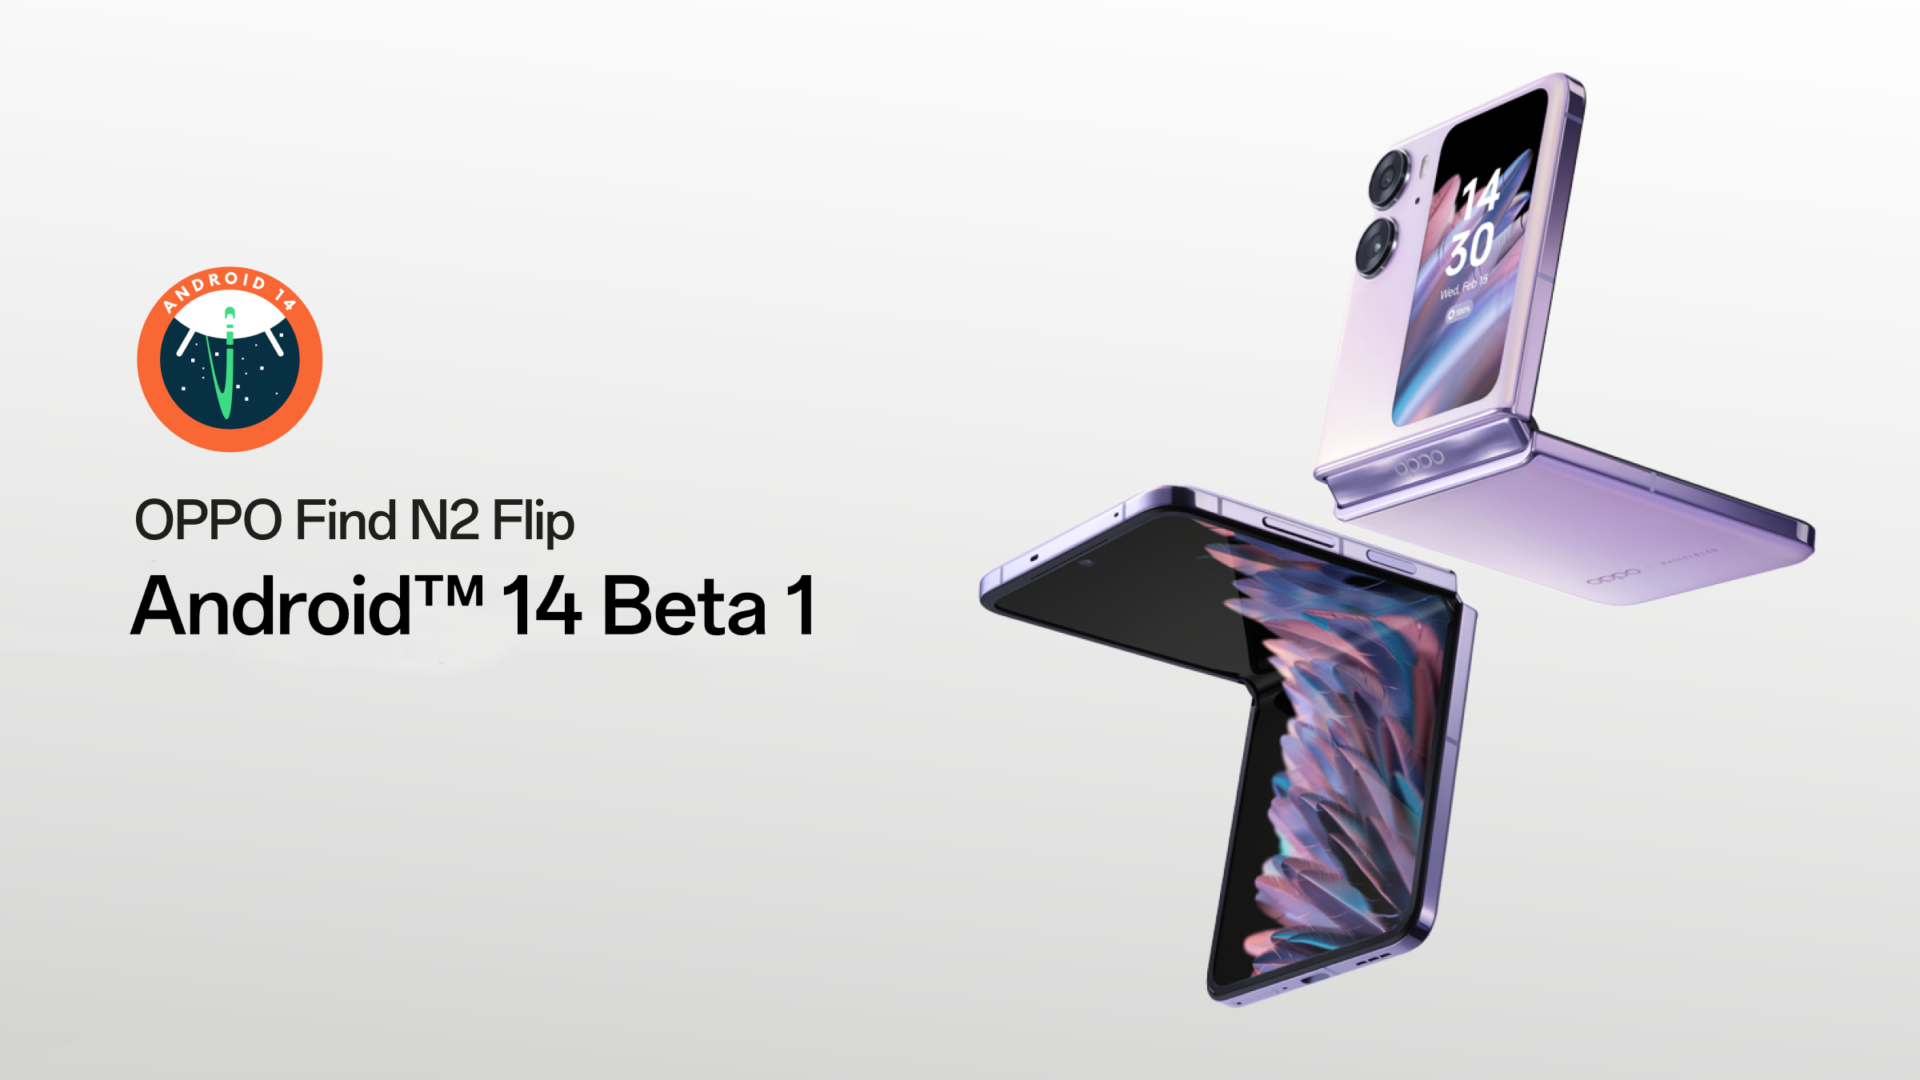 Android 14 Beta is available for OPPO Find N2 Flip